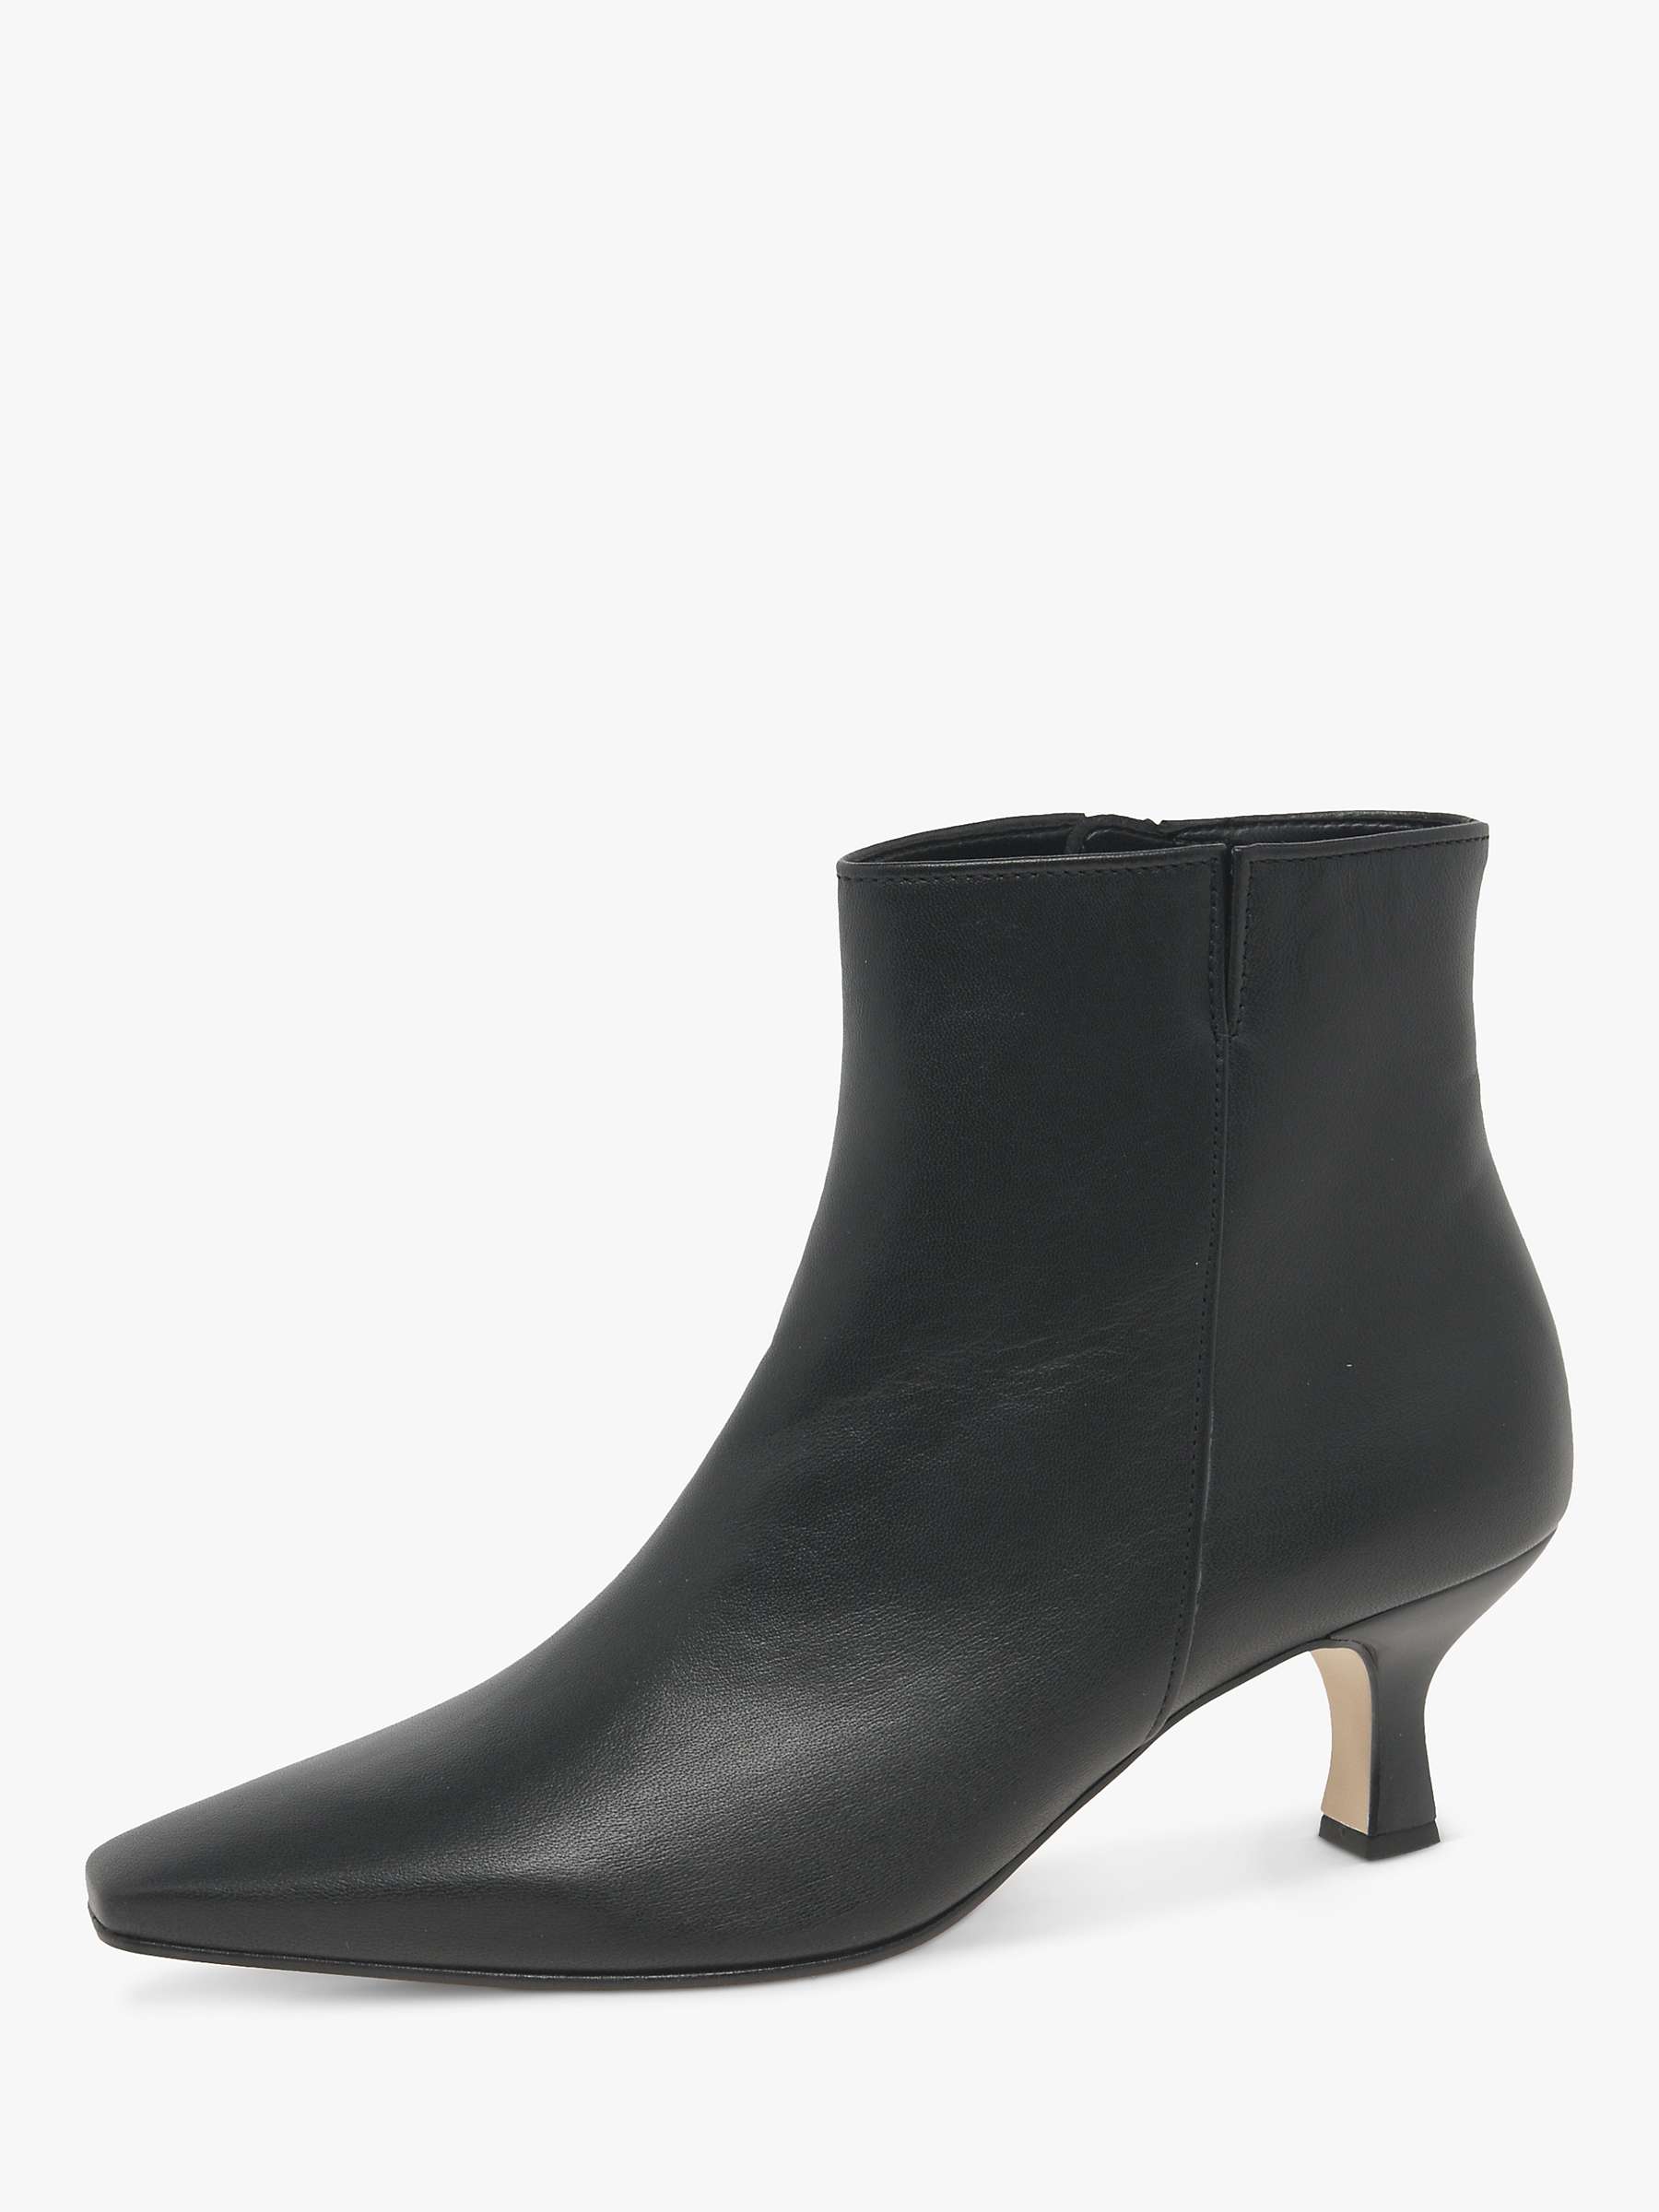 Gabor Insight Leather Pointed Toe Ankle Boots, Black at John Lewis ...